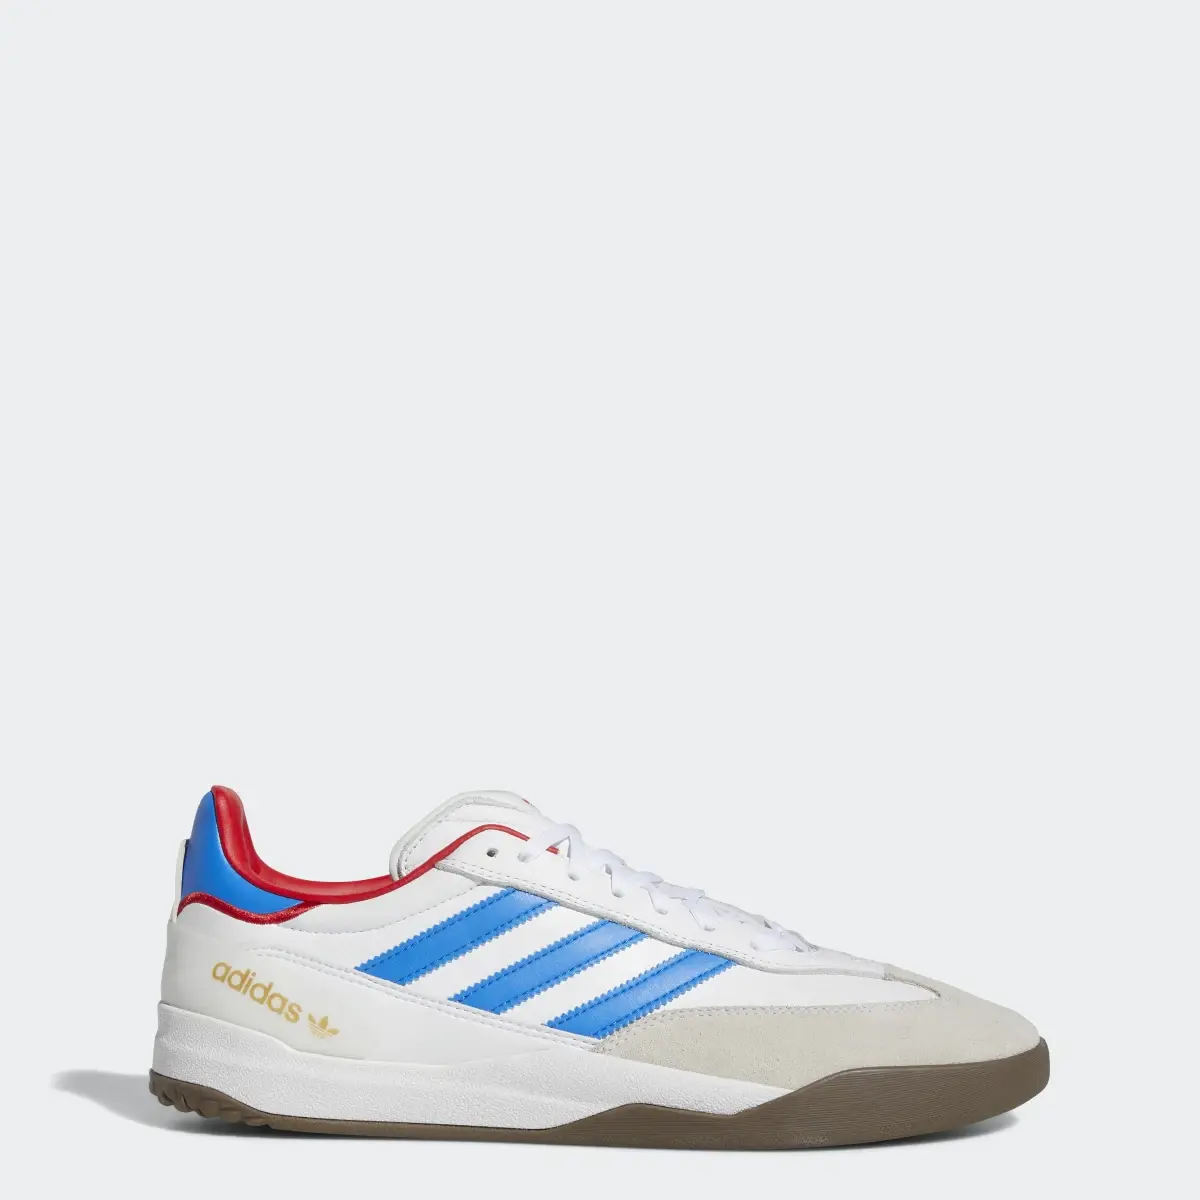 Adidas Copa Nationale Shoes. 1